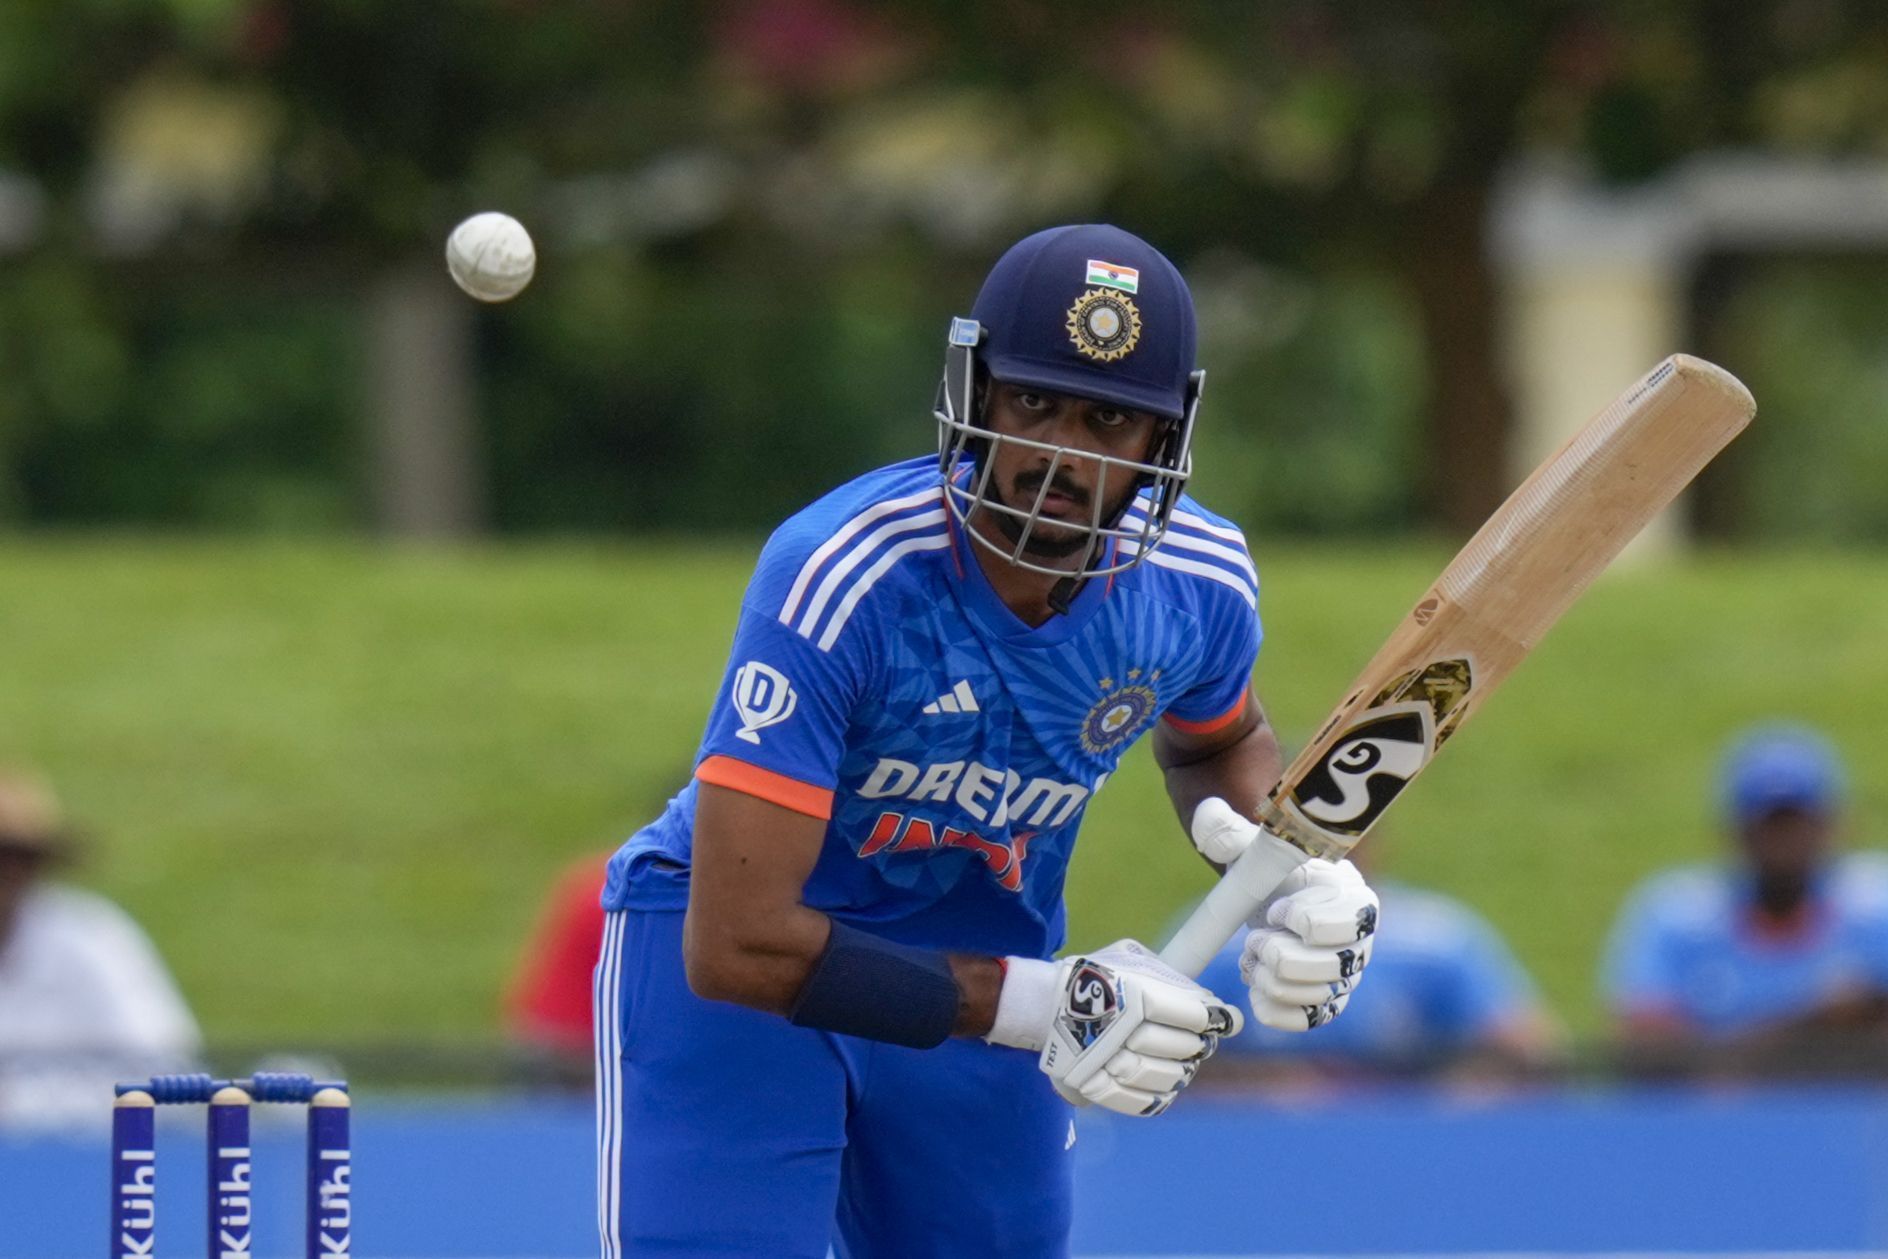 Axar Patel provides the left-handed option with the bat